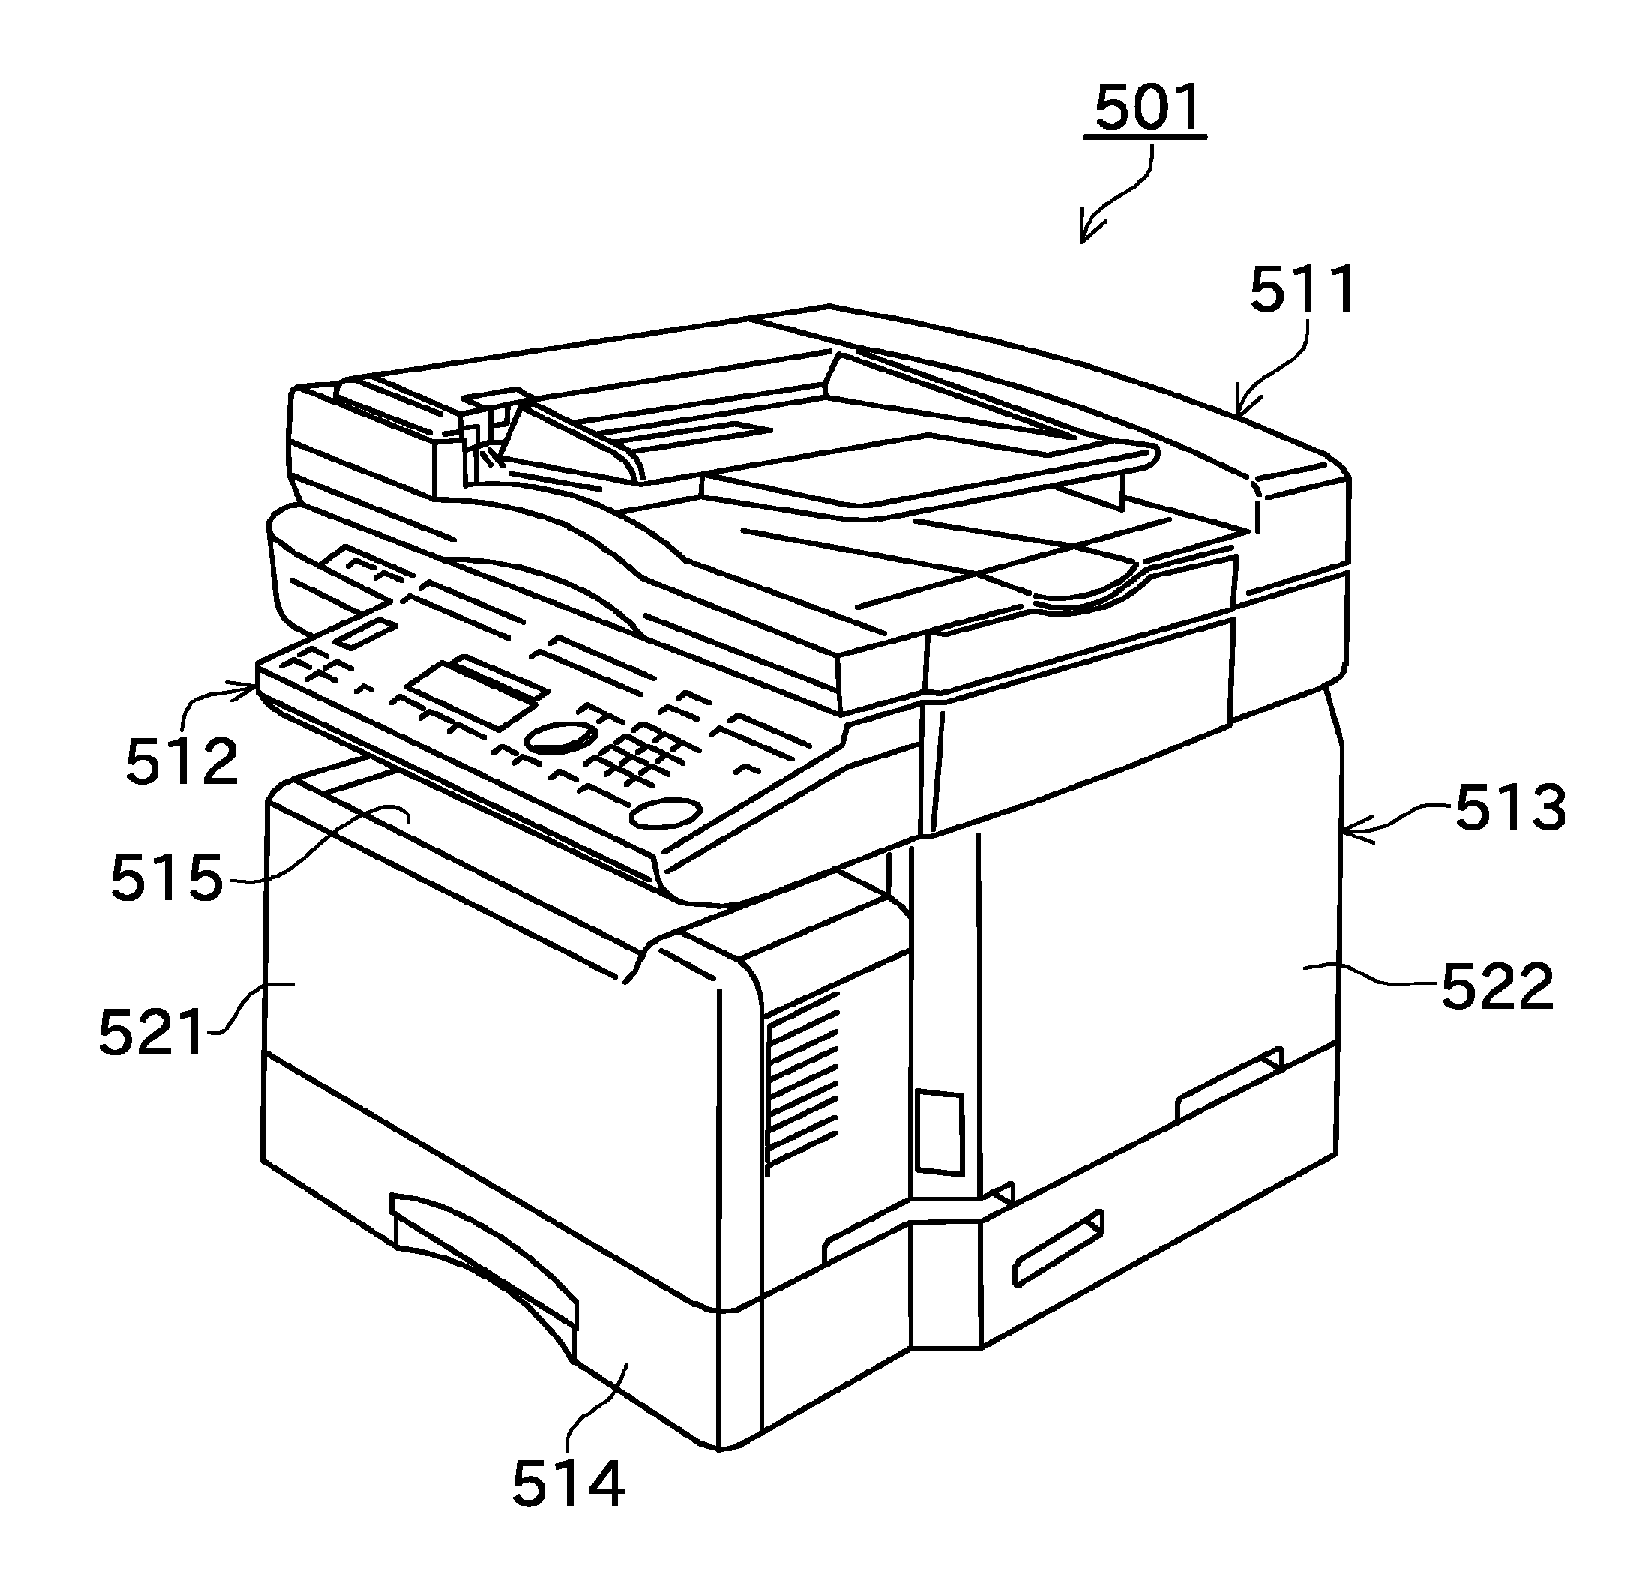 Image forming device and method of manufacturing the same